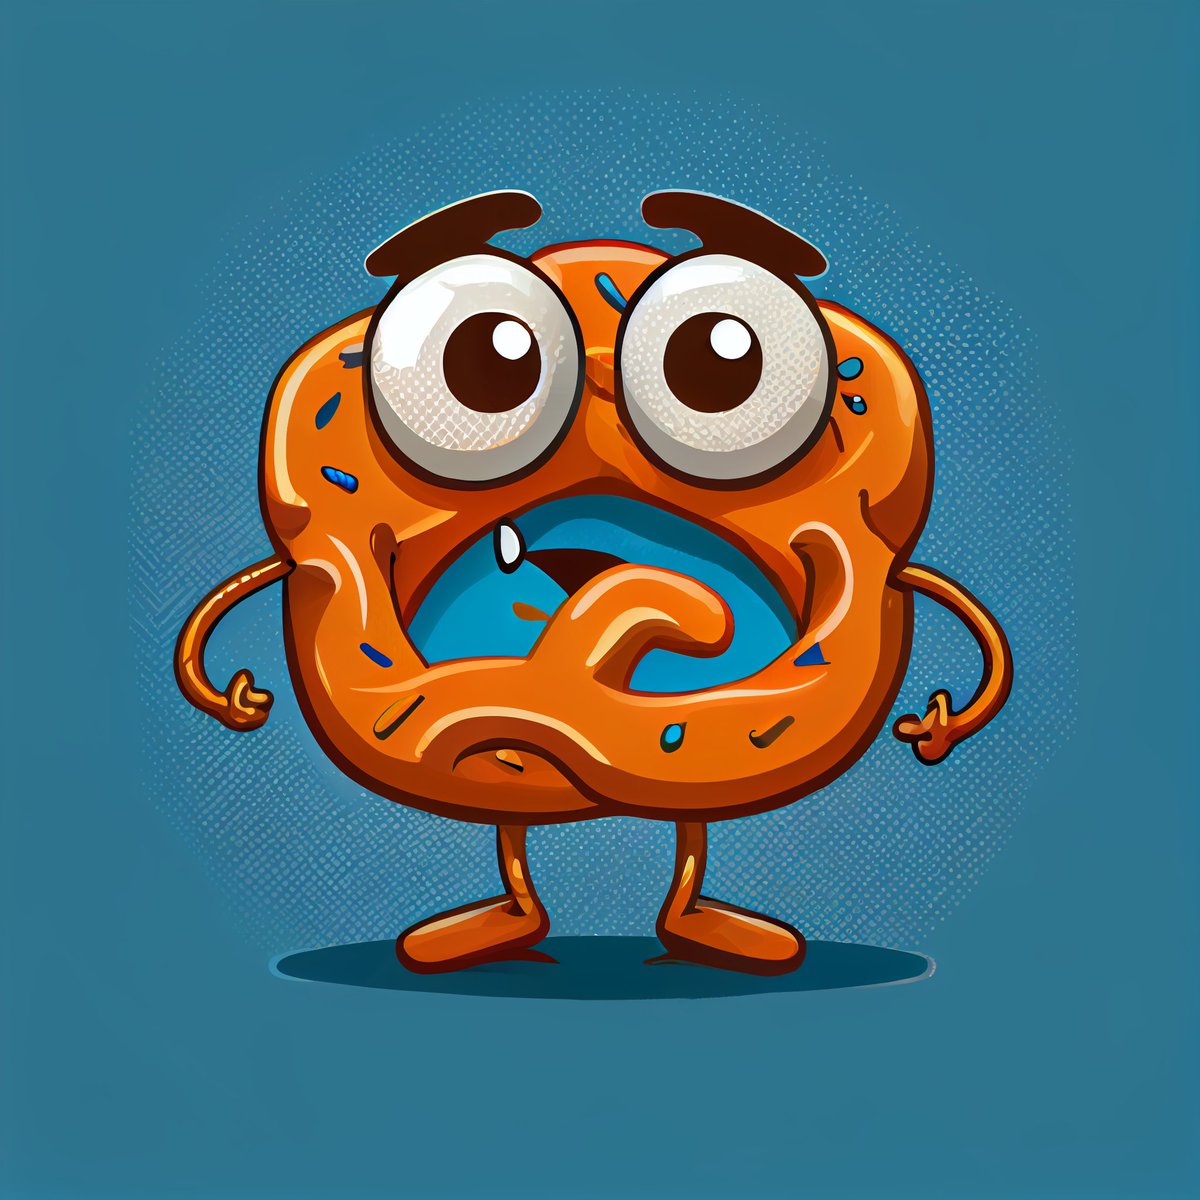 SPECIAL EVENT! 
BUY ONE GET ONE FREE🎉🎉🎉

GM #NFTCommunity ☀️🔥☕️

PRETZELTOONS

Items 250  ··  Owner 4  ··  Chain Polygon  ··  Price 5 Matic

Pretzeltoons #225
🔗🥨👇
opensea.io/assets/matic/0…

#NFT #NFTs #NFTCommunity #nftcollector #NFTartist #NFTcollections #pretzeltoons